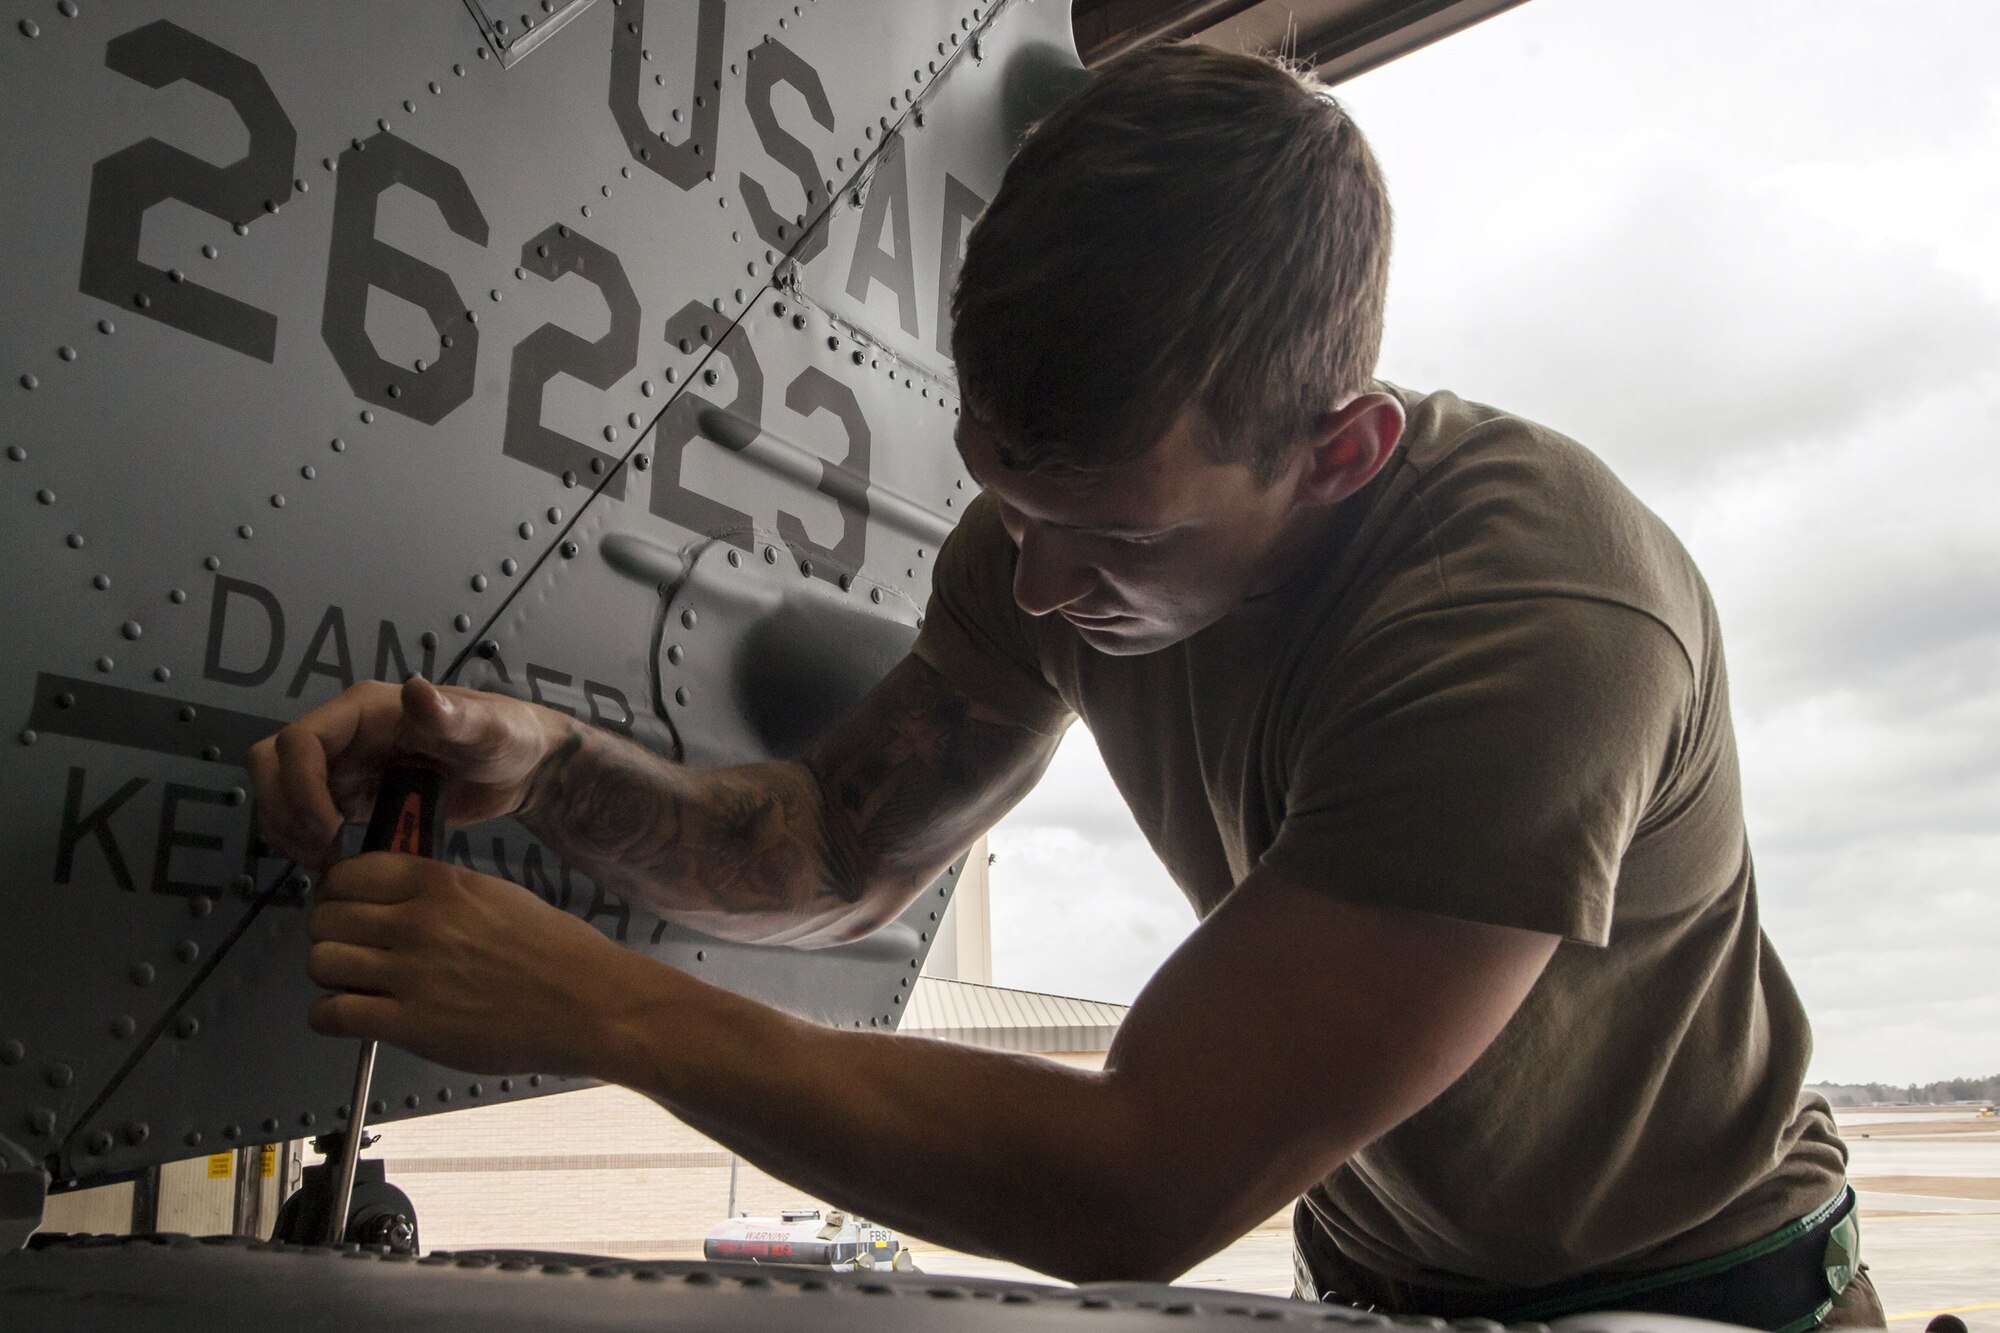 Senior Airman Joshua Herron, 723d Aircraft Maintenance Squadron (AMXS) HH-60G Pave Hawk crew chief, tightens a bolt, Jan. 22, 2018, at Moody Air Force Base, Ga. From 16-25 Jan., Airmen from the 723d AMXS performed 216 hours of maintenance on an HH-60 after it returned to Moody following 350 days of depot maintenance at Naval Air Station (NAS) Jacksonville. While at NAS Jacksonville, the HH-60 underwent a complete structural overhaul where it received new internal and external components along with repairs and updated programming. (U.S. Air Force photo by Airman Eugene Oliver)